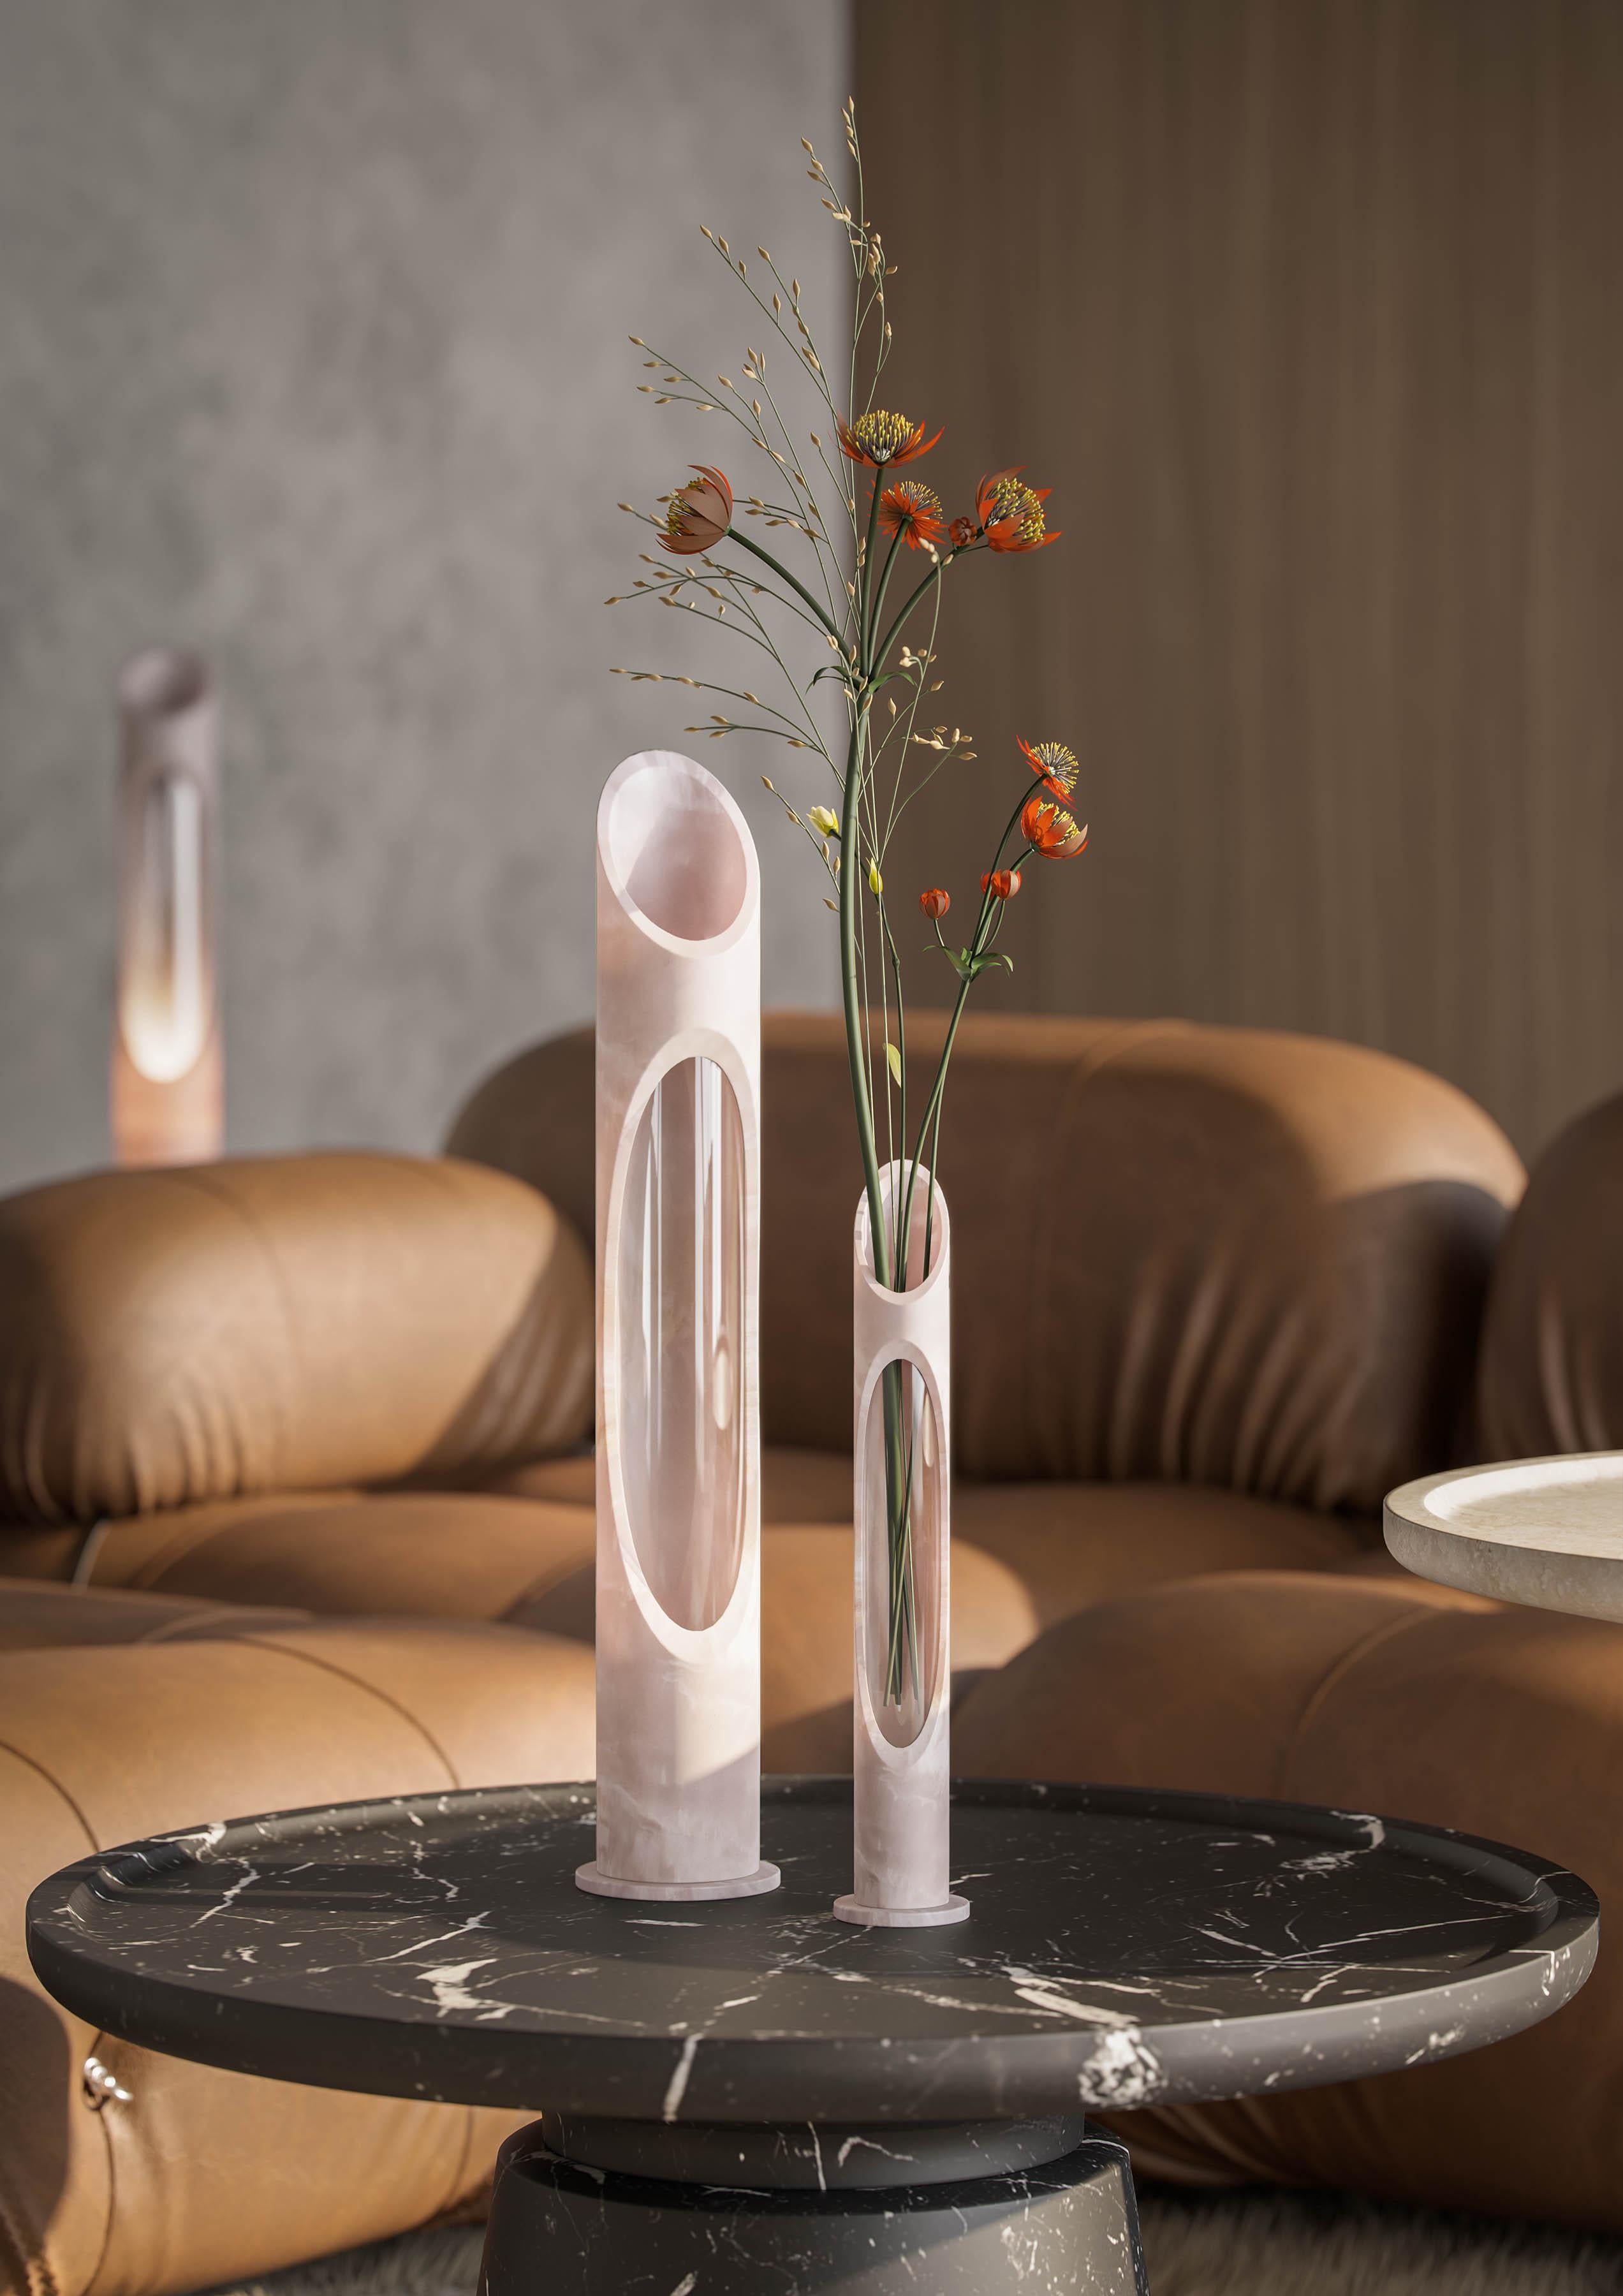 Vase S in Pink Egeo marble, designed by Jacopo Simonetti.
Available also in Black Marquinia, white onyx, White Arabescato marble and in the L version. 

Armonia Collection: Inspired by the captivating image that two contrasting elements can